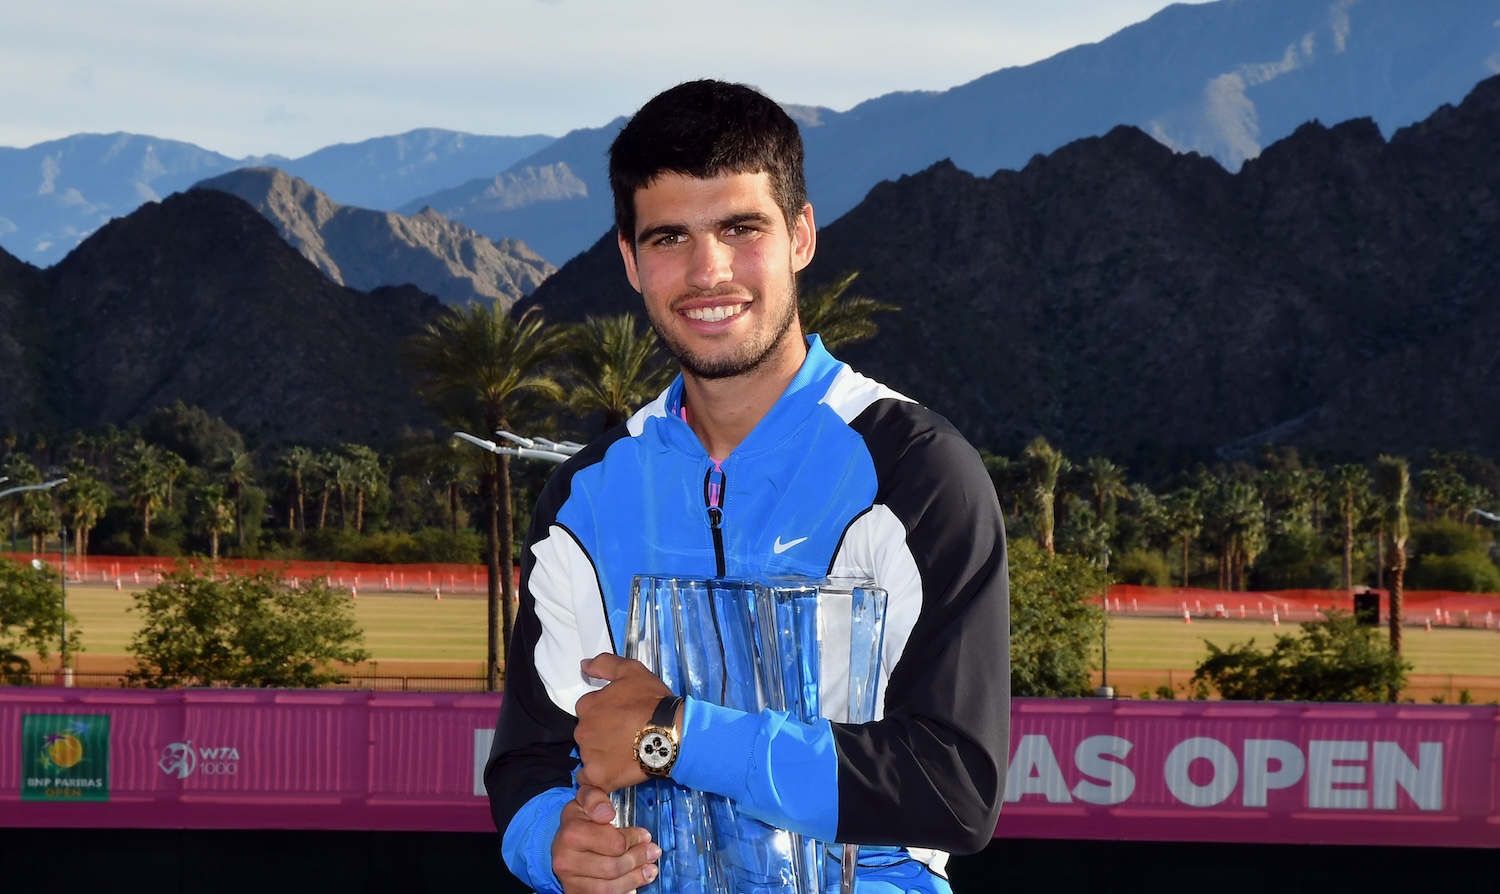 Carlos Alcaraz smiles with Indian Wells trophy in front of mountains